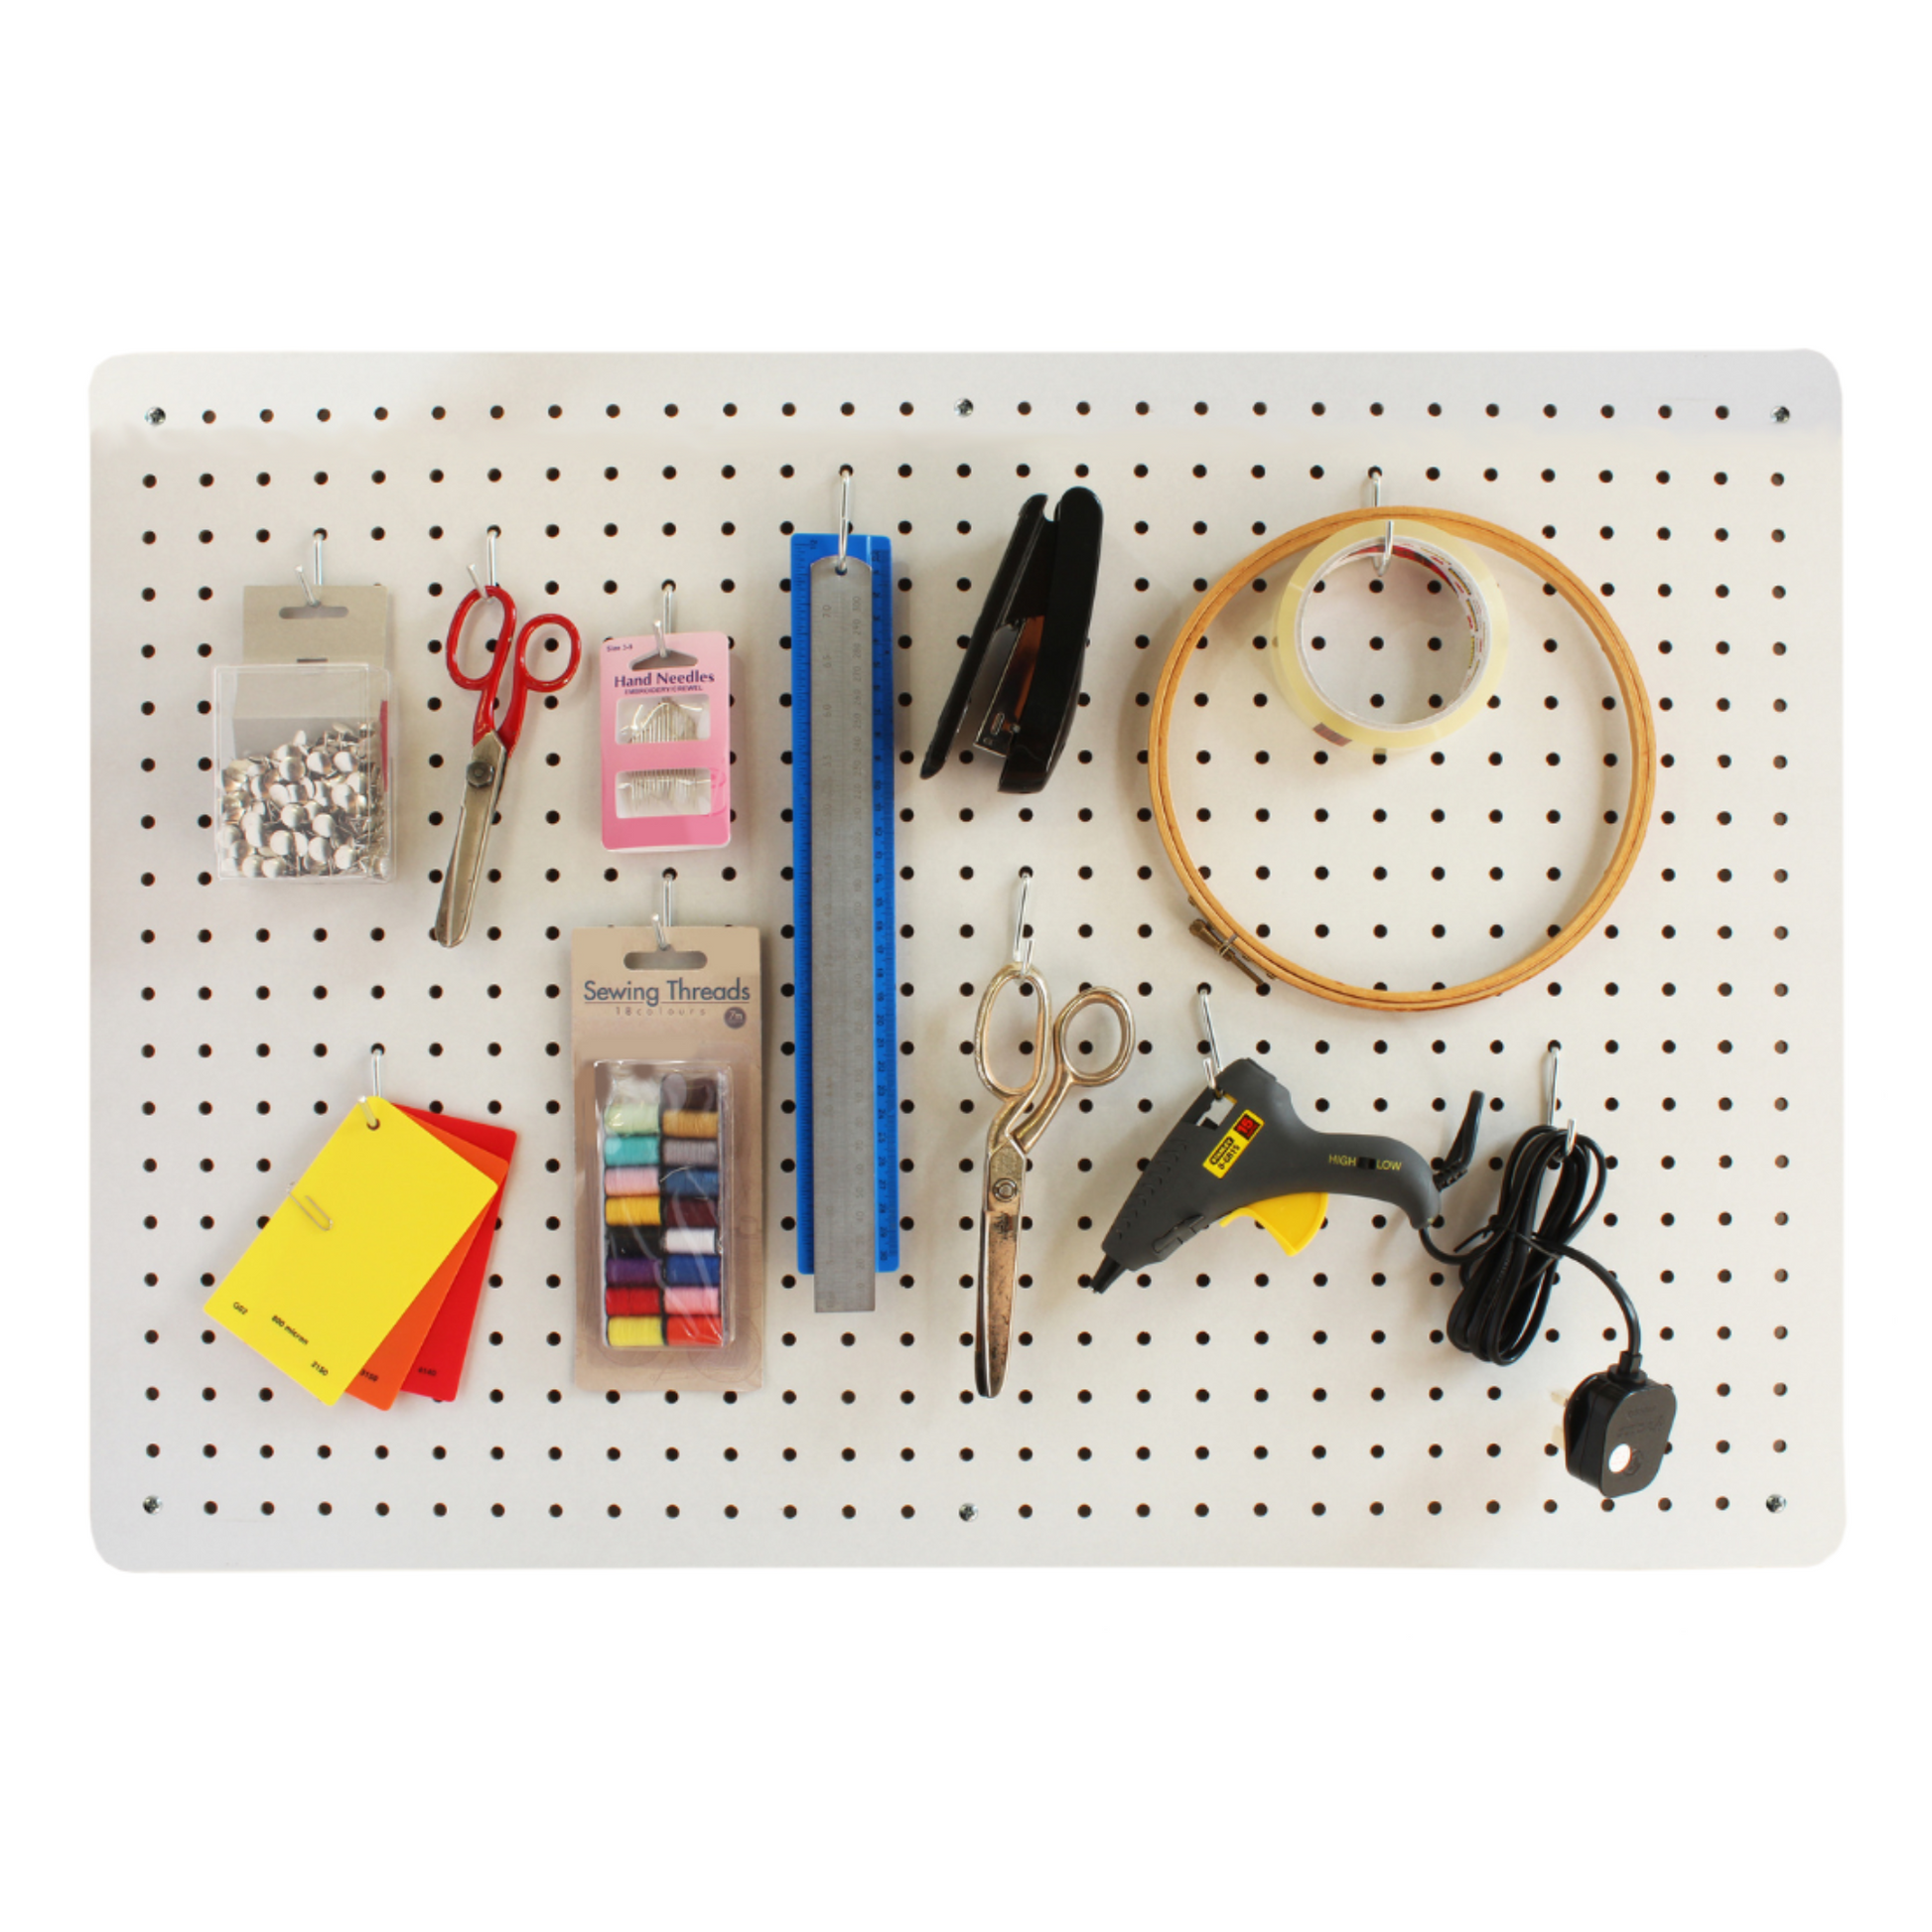 A 76x56cm white pegboard neatly organizing a variety of craft supplies including scissors, sewing threads, hand needles, a ruler, stapler, embroidery hoop and glue gun, illustrating an efficient use of space for creative tools.